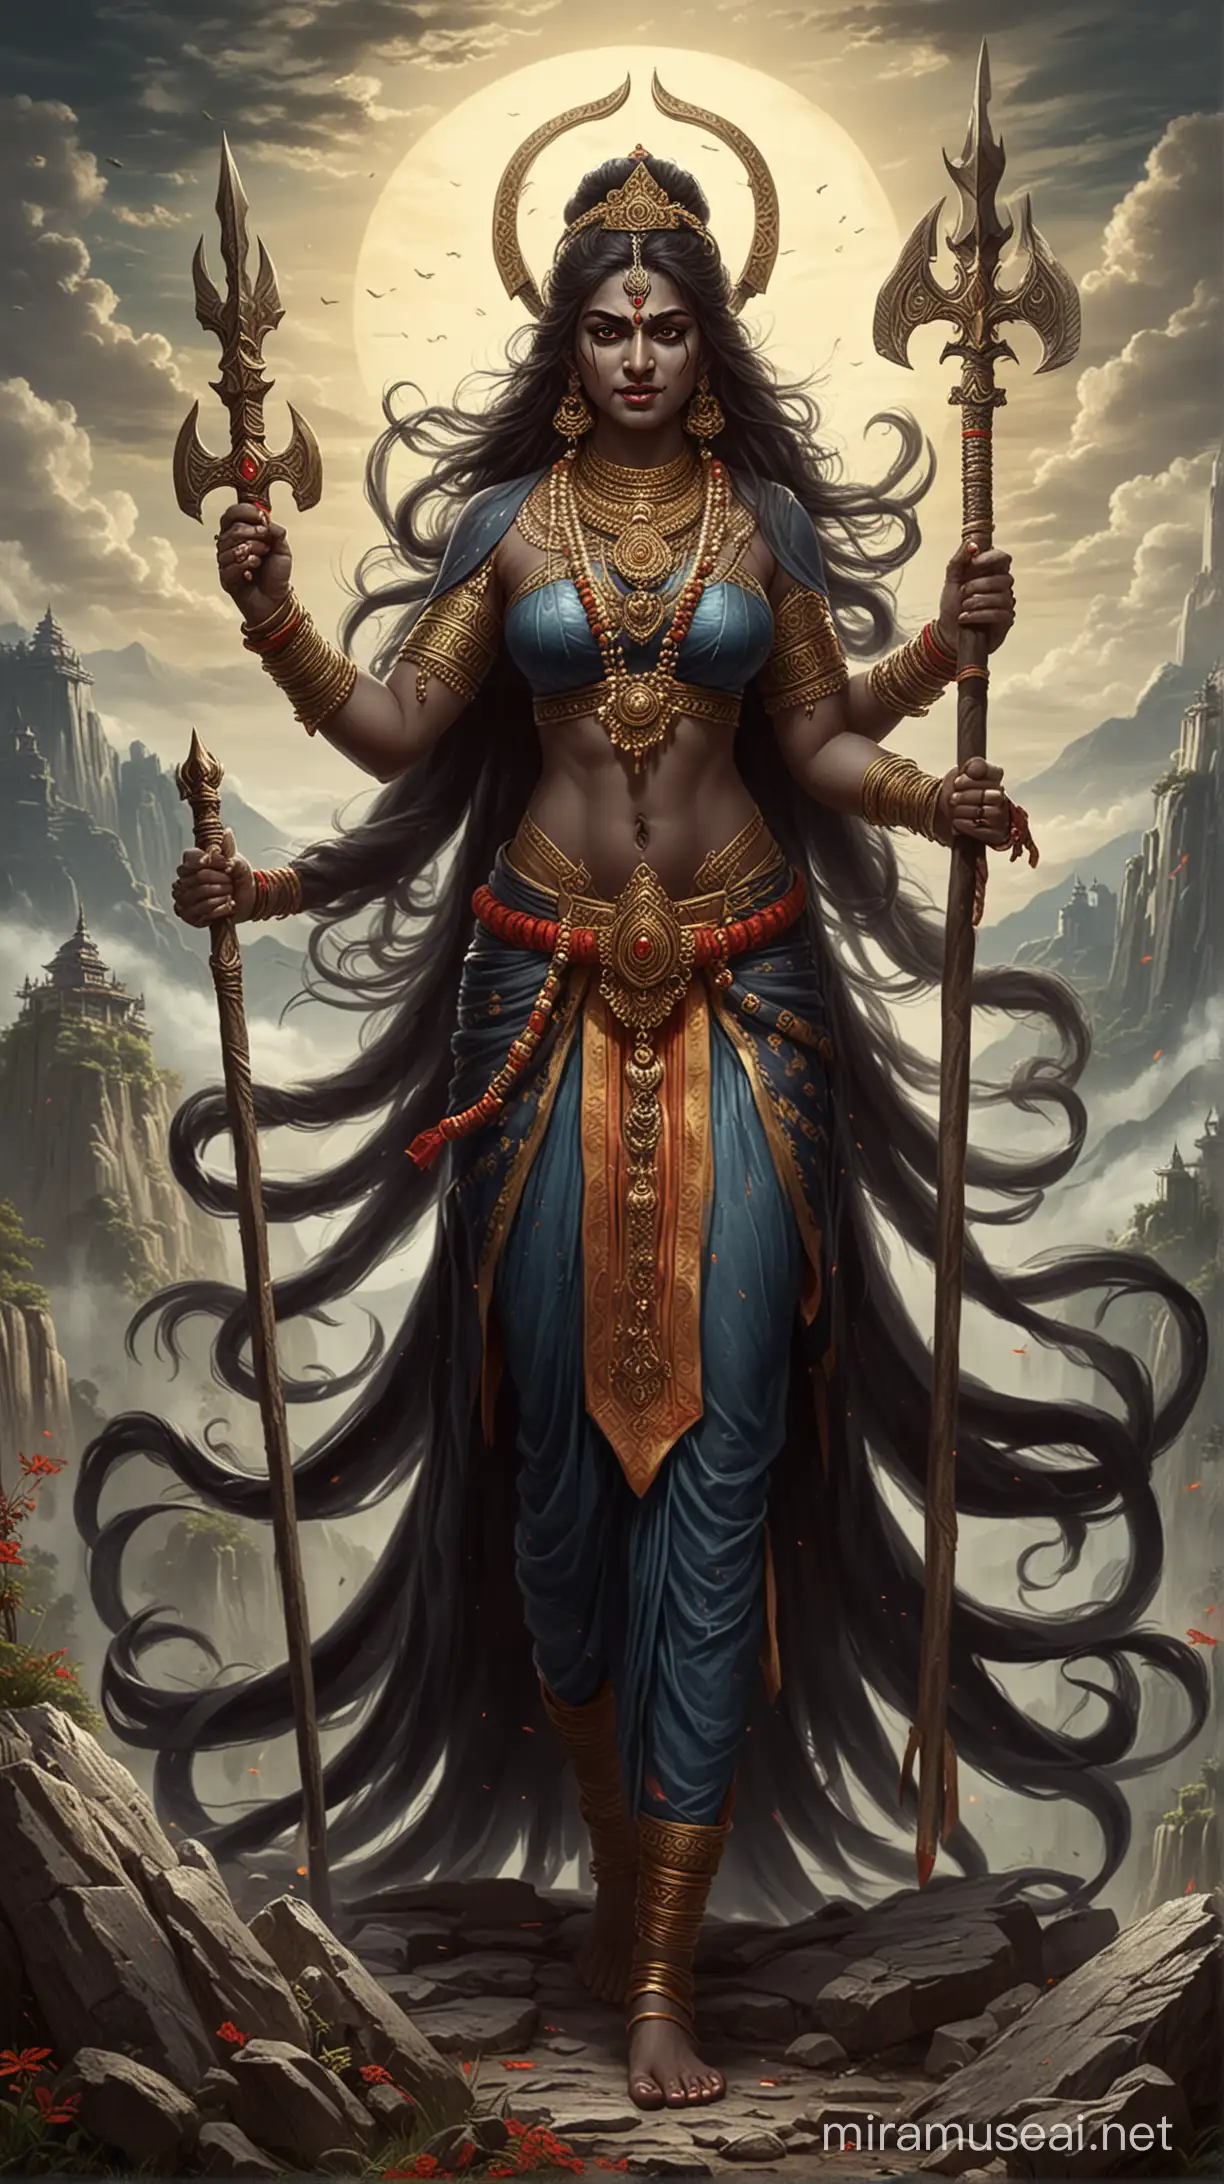 Begin drawing Maa Kali at the top or amidst the hills. You can draw her in a traditional form with multiple arms and fierce expression. Pay attention to details like her clothing, ornaments, and the weapons she holds such as a sword and a trident. Use references or images of Maa Kali to ensure accuracy in your drawing.